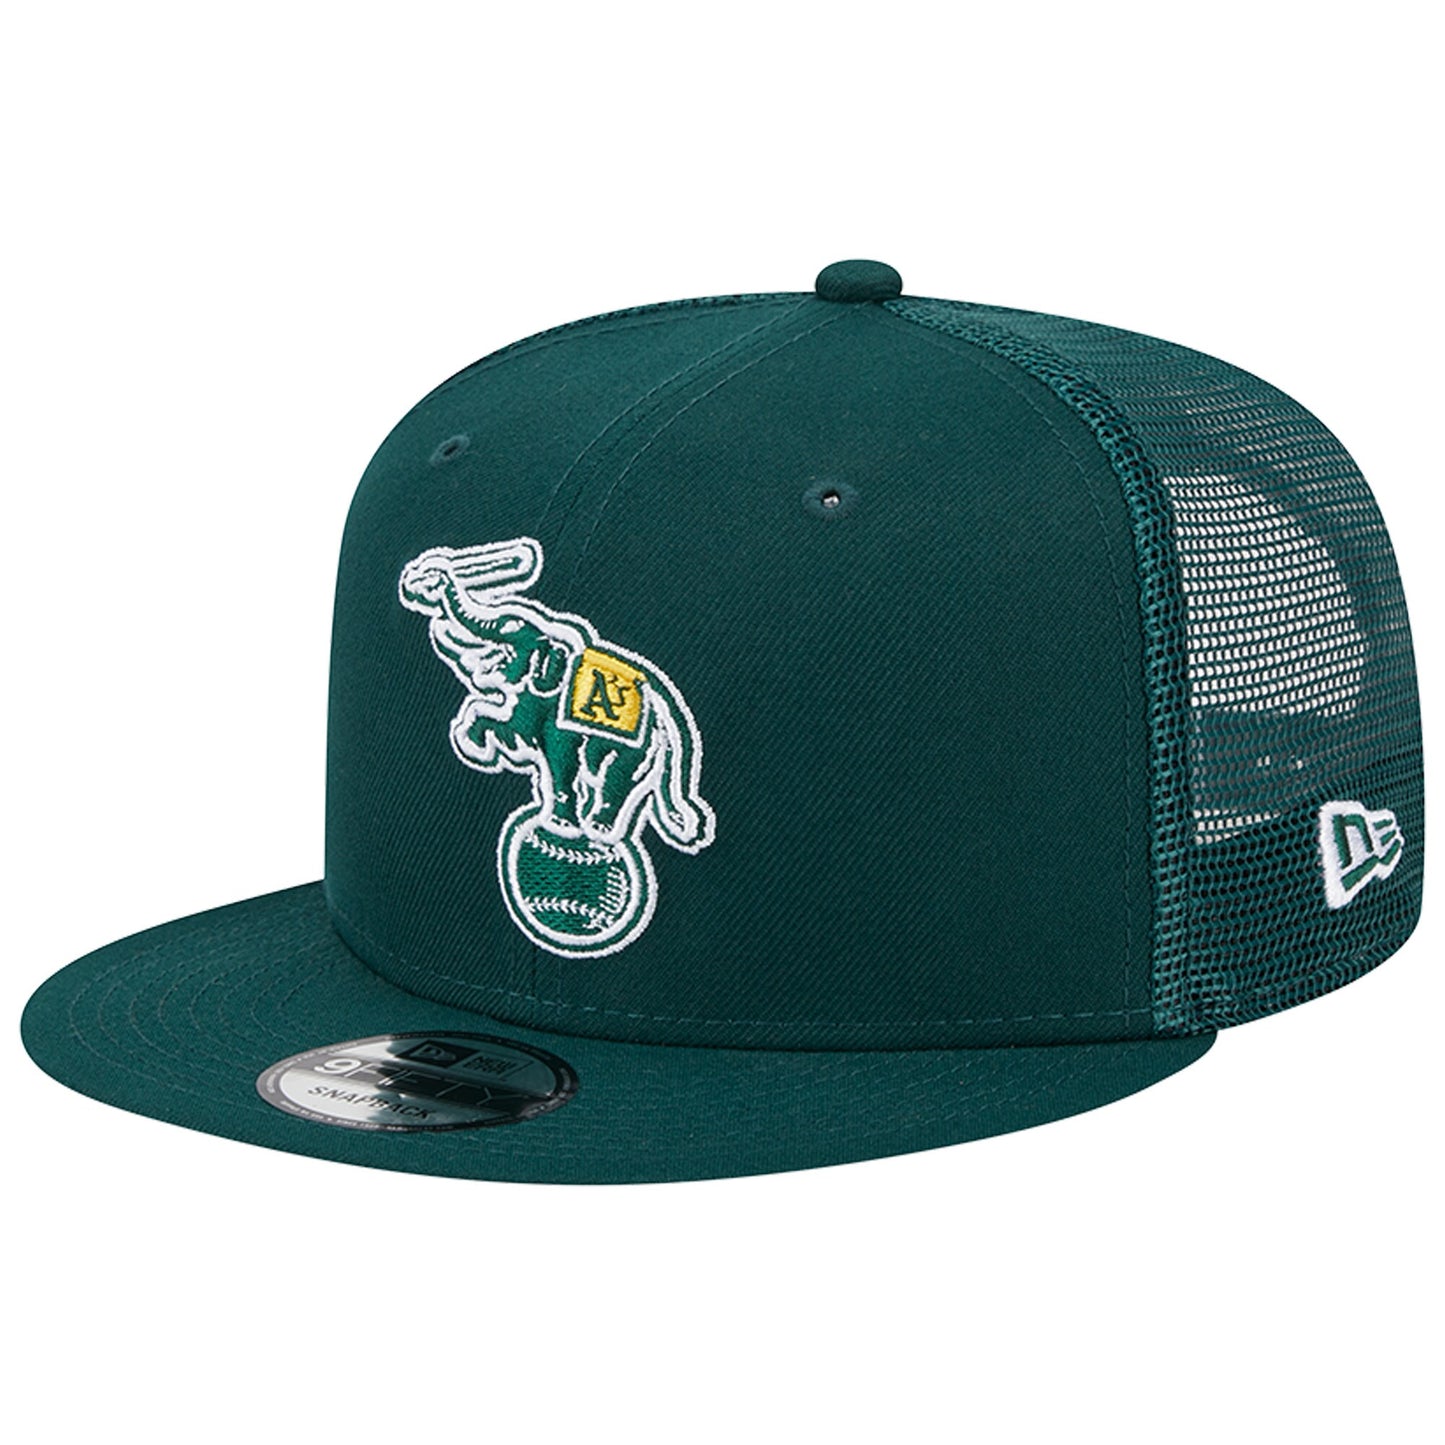 Oakland Athletics New Era Cooperstown Collection Team Color Trucker 9FIFTY Snapback Hat - Green